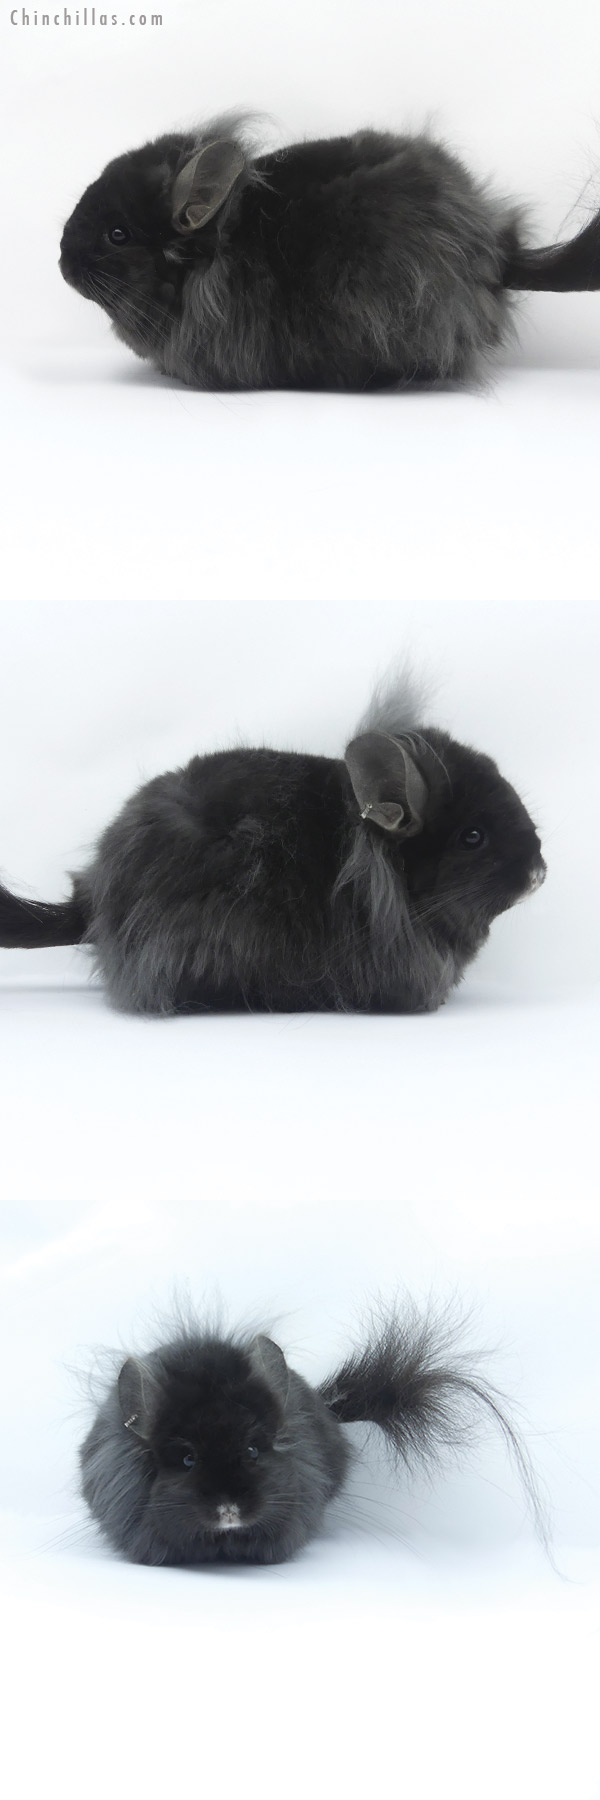 Chinchilla or related item offered for sale or export on Chinchillas.com - 19409 Large Ebony ( Locken Carrier ) G3  Royal Persian Angora Female Chinchilla